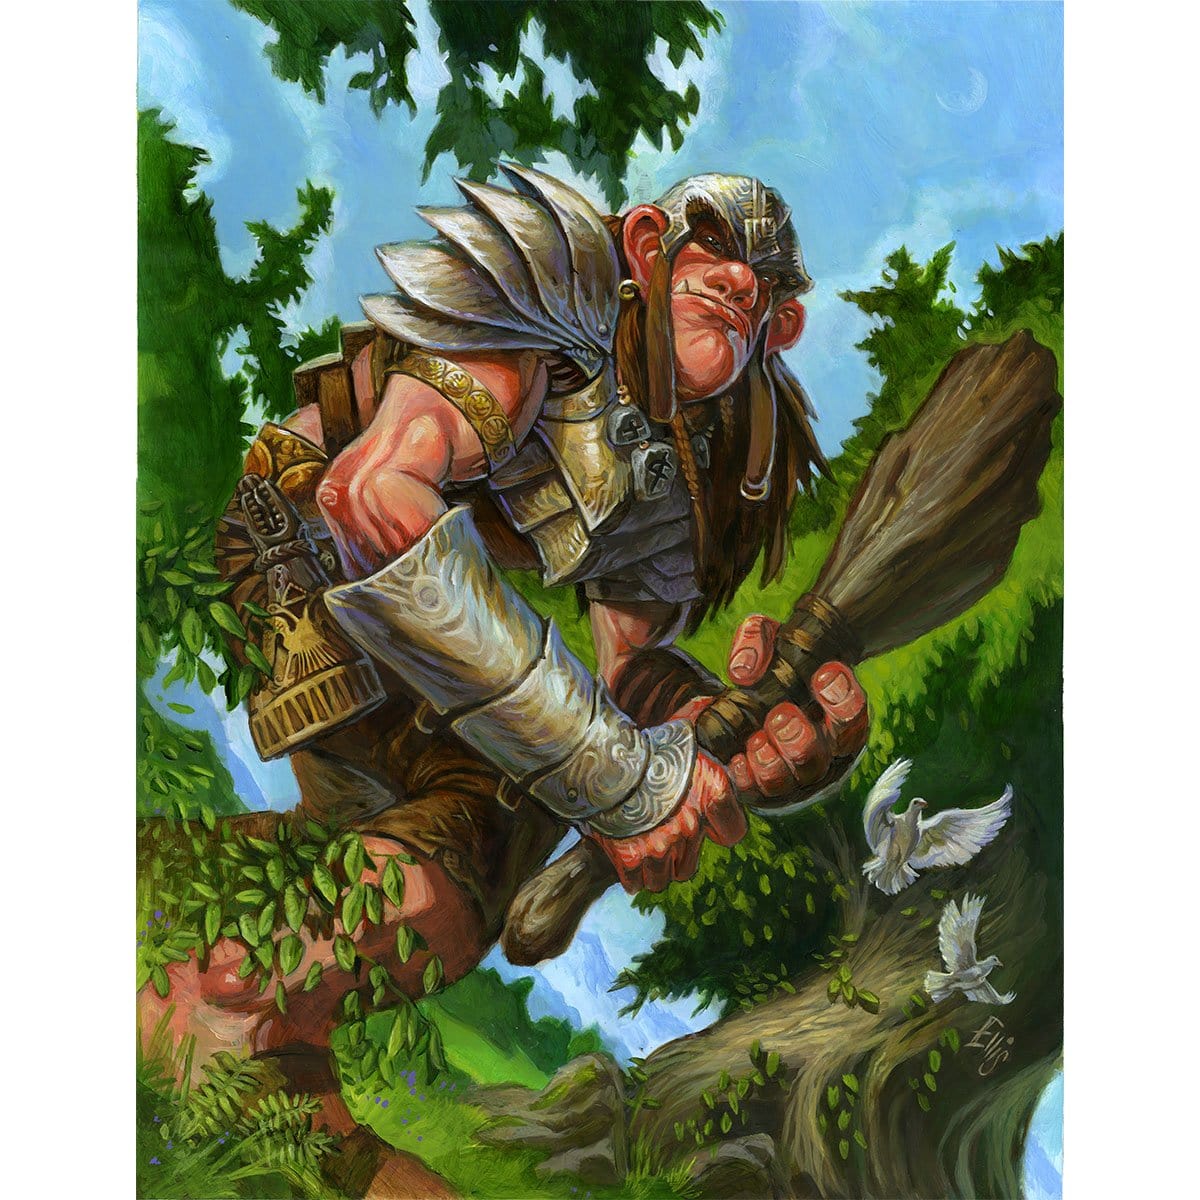 Giant Warrior Token Print - Print - Original Magic Art - Accessories for Magic the Gathering and other card games